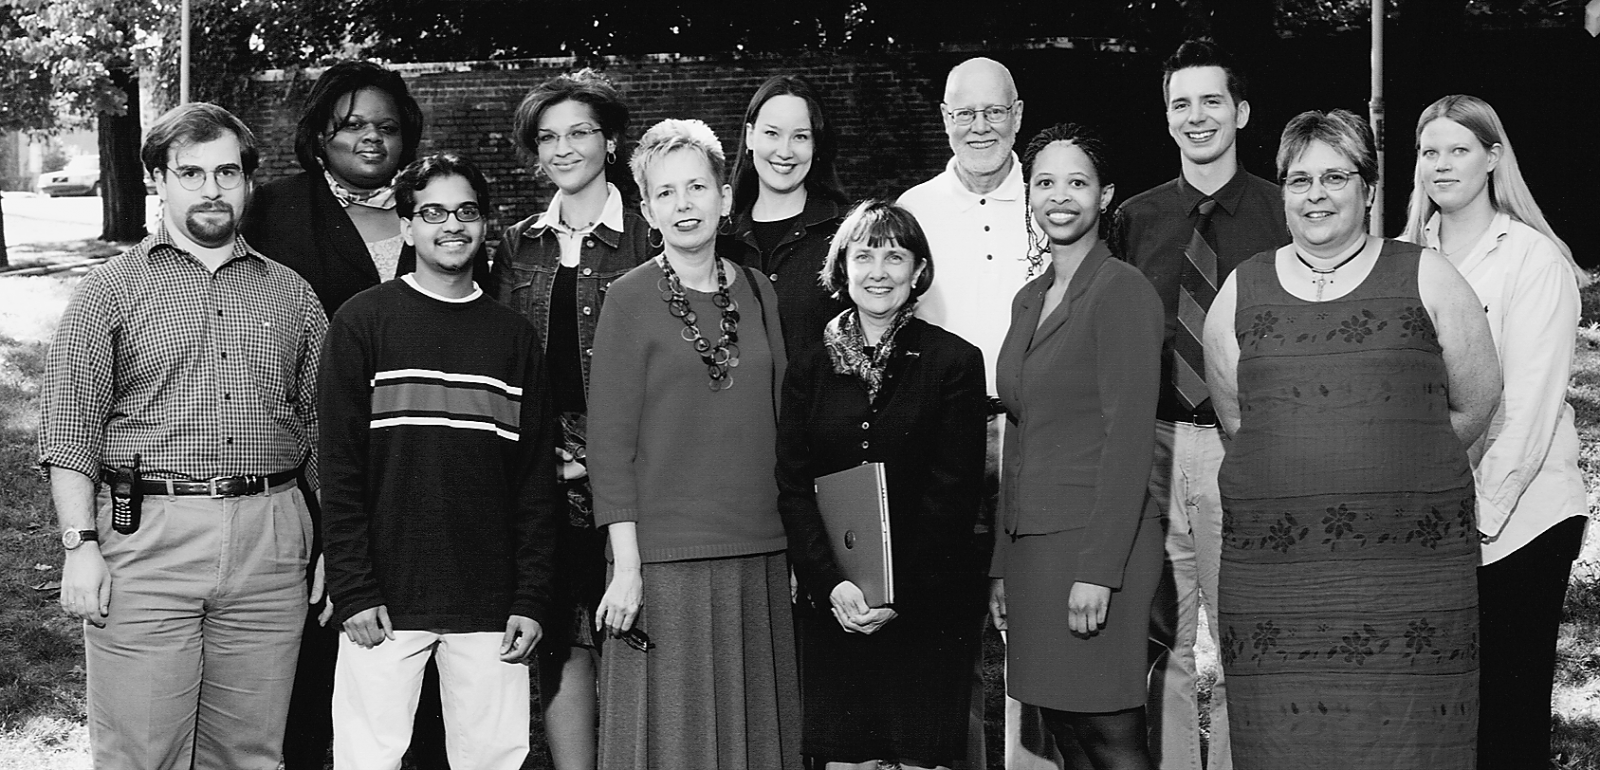 ISM staff in 2003